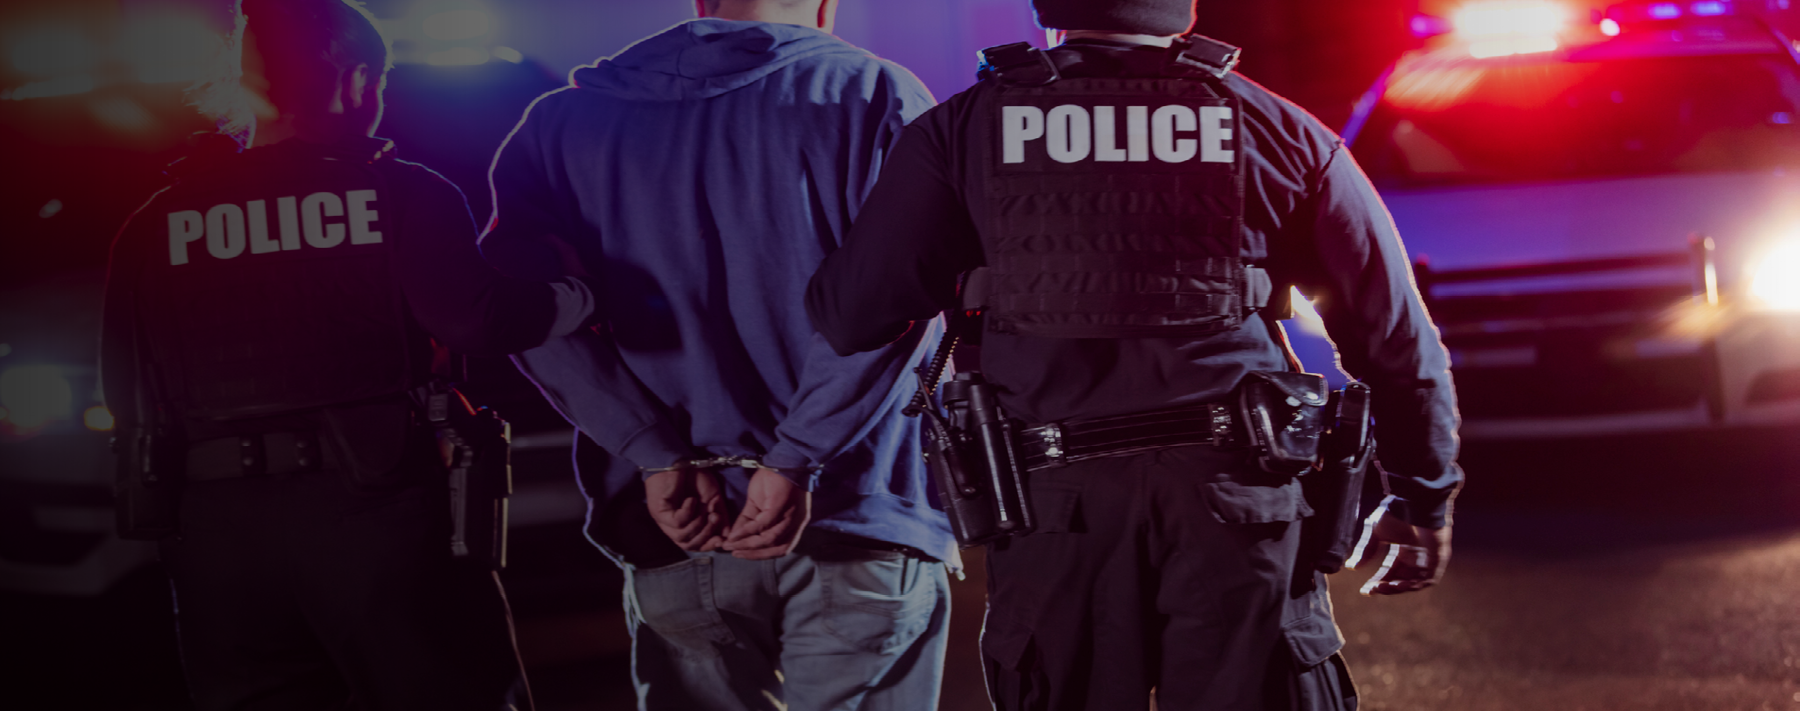 Recent Polls on Policing Show Positive Trends for U.S. Law Enforcement